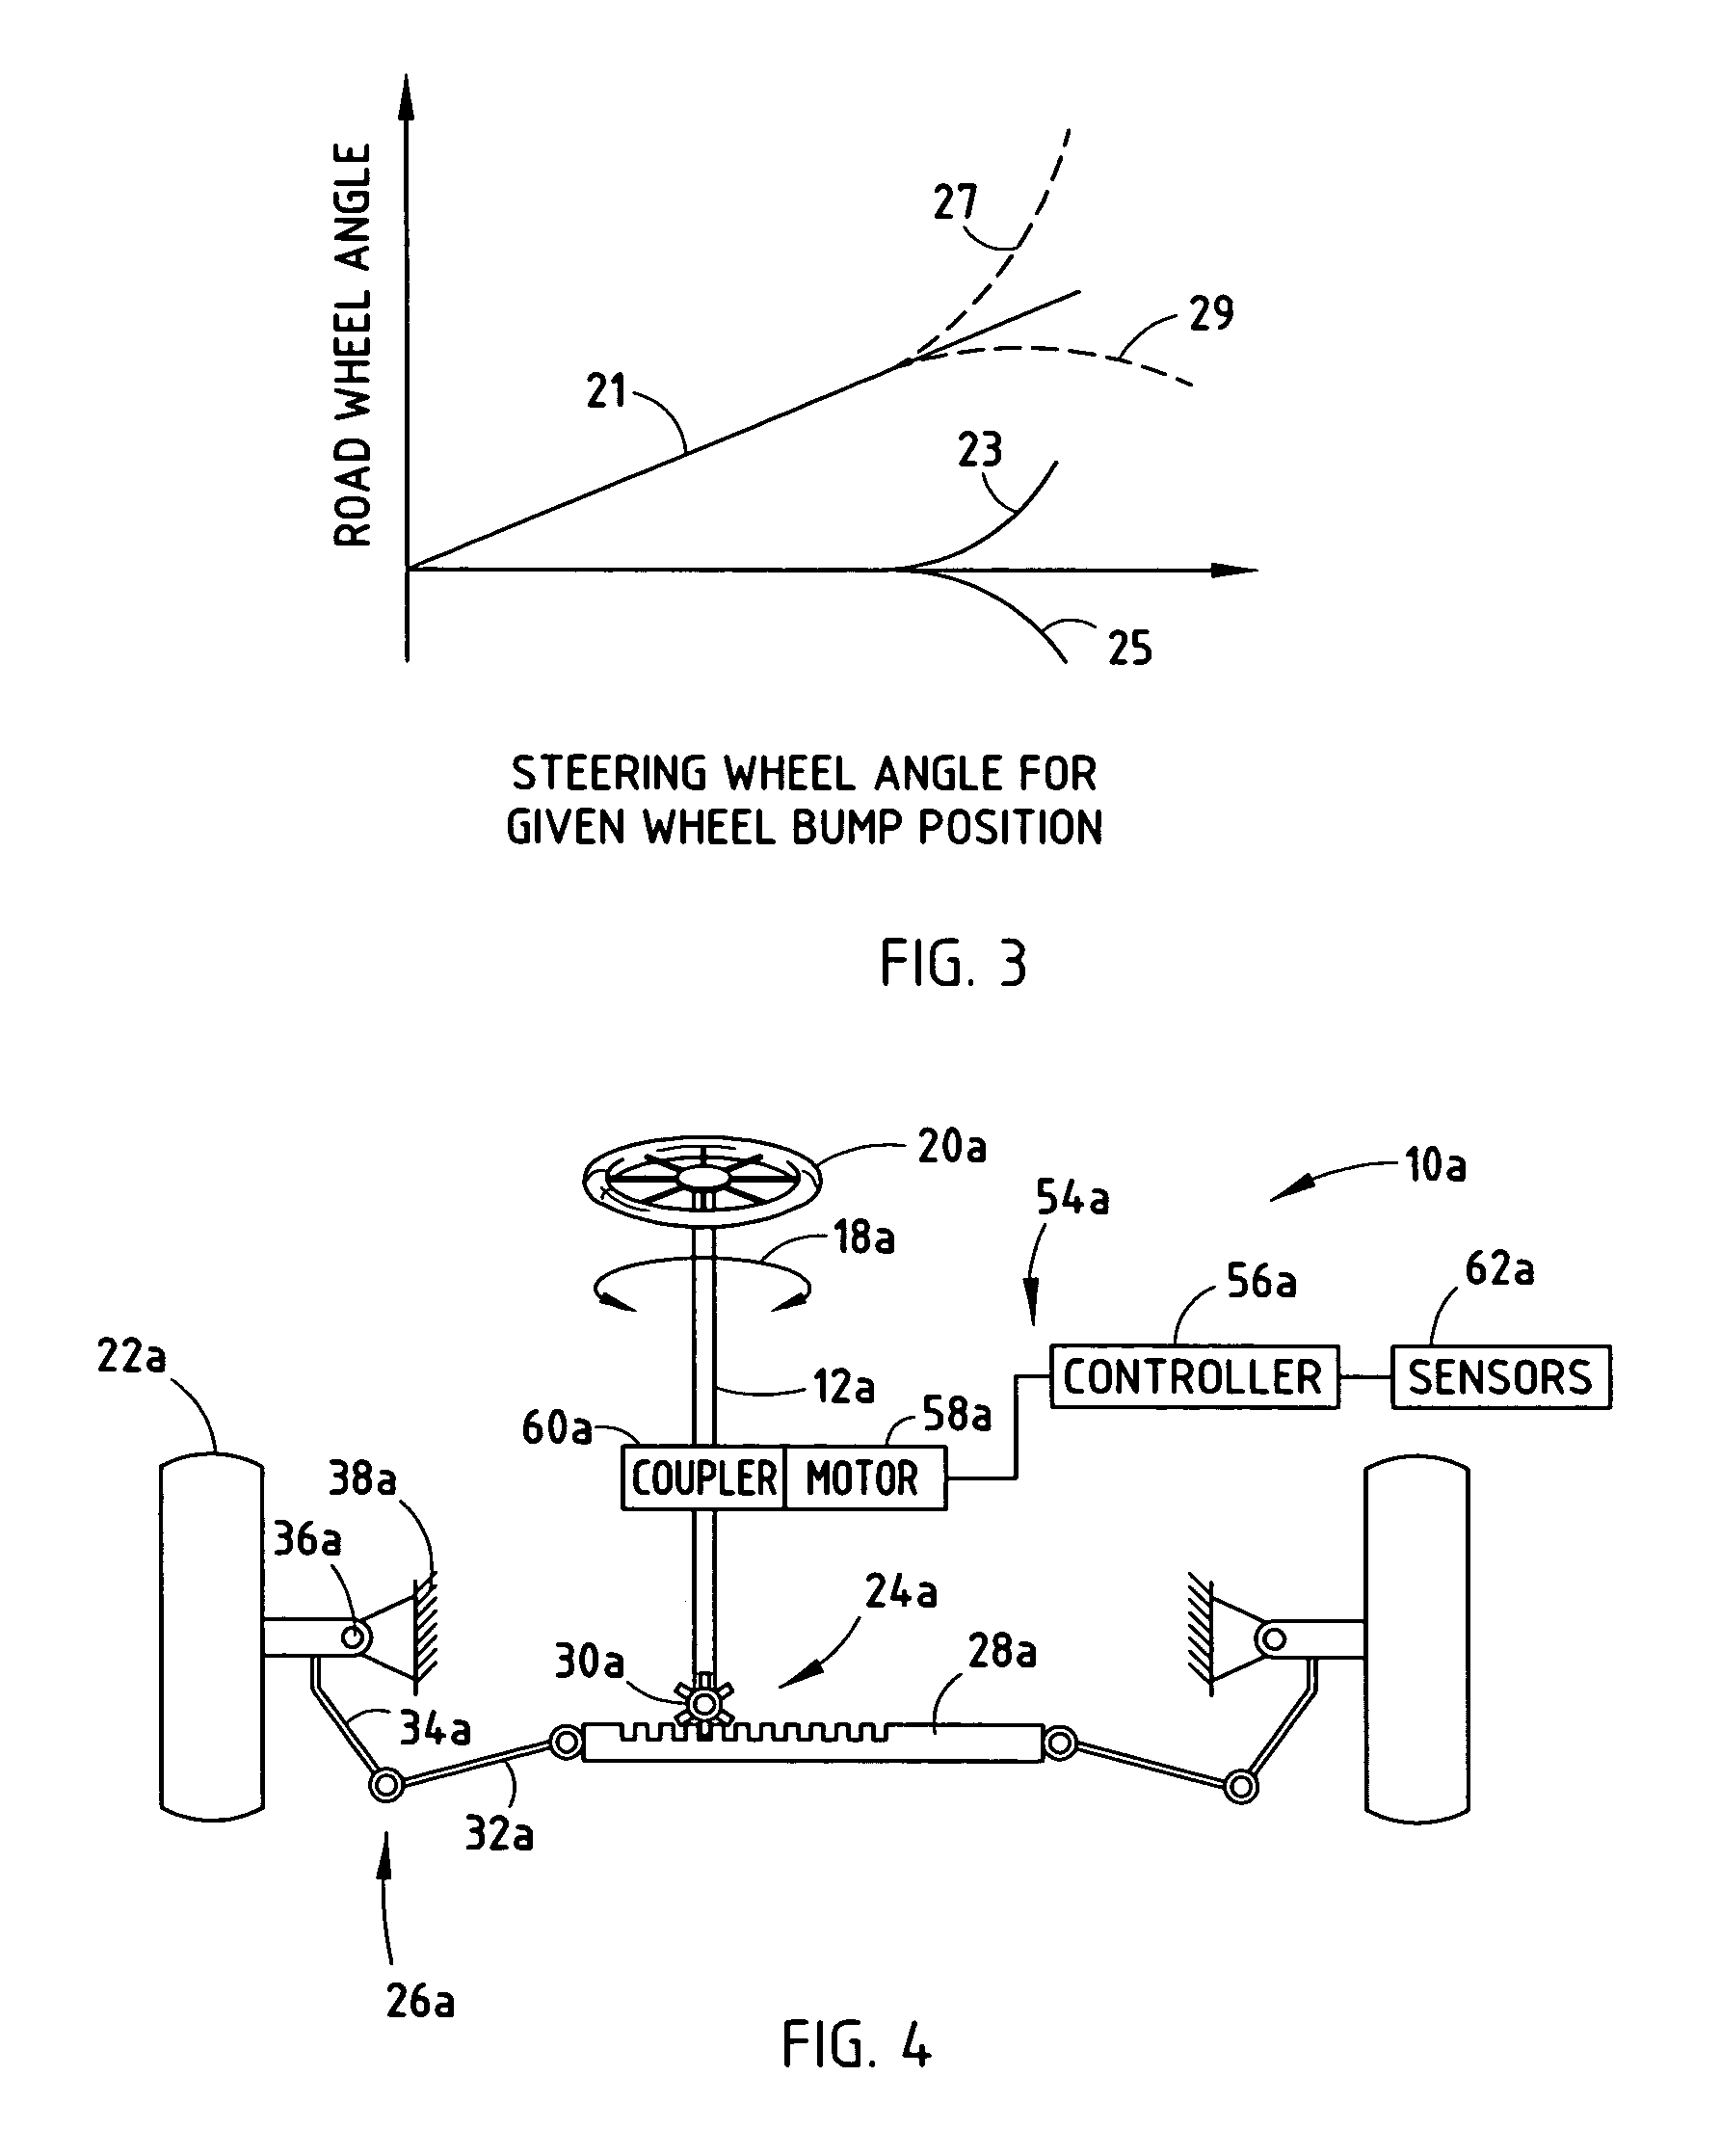 Vehicle steering system for kickback reduction